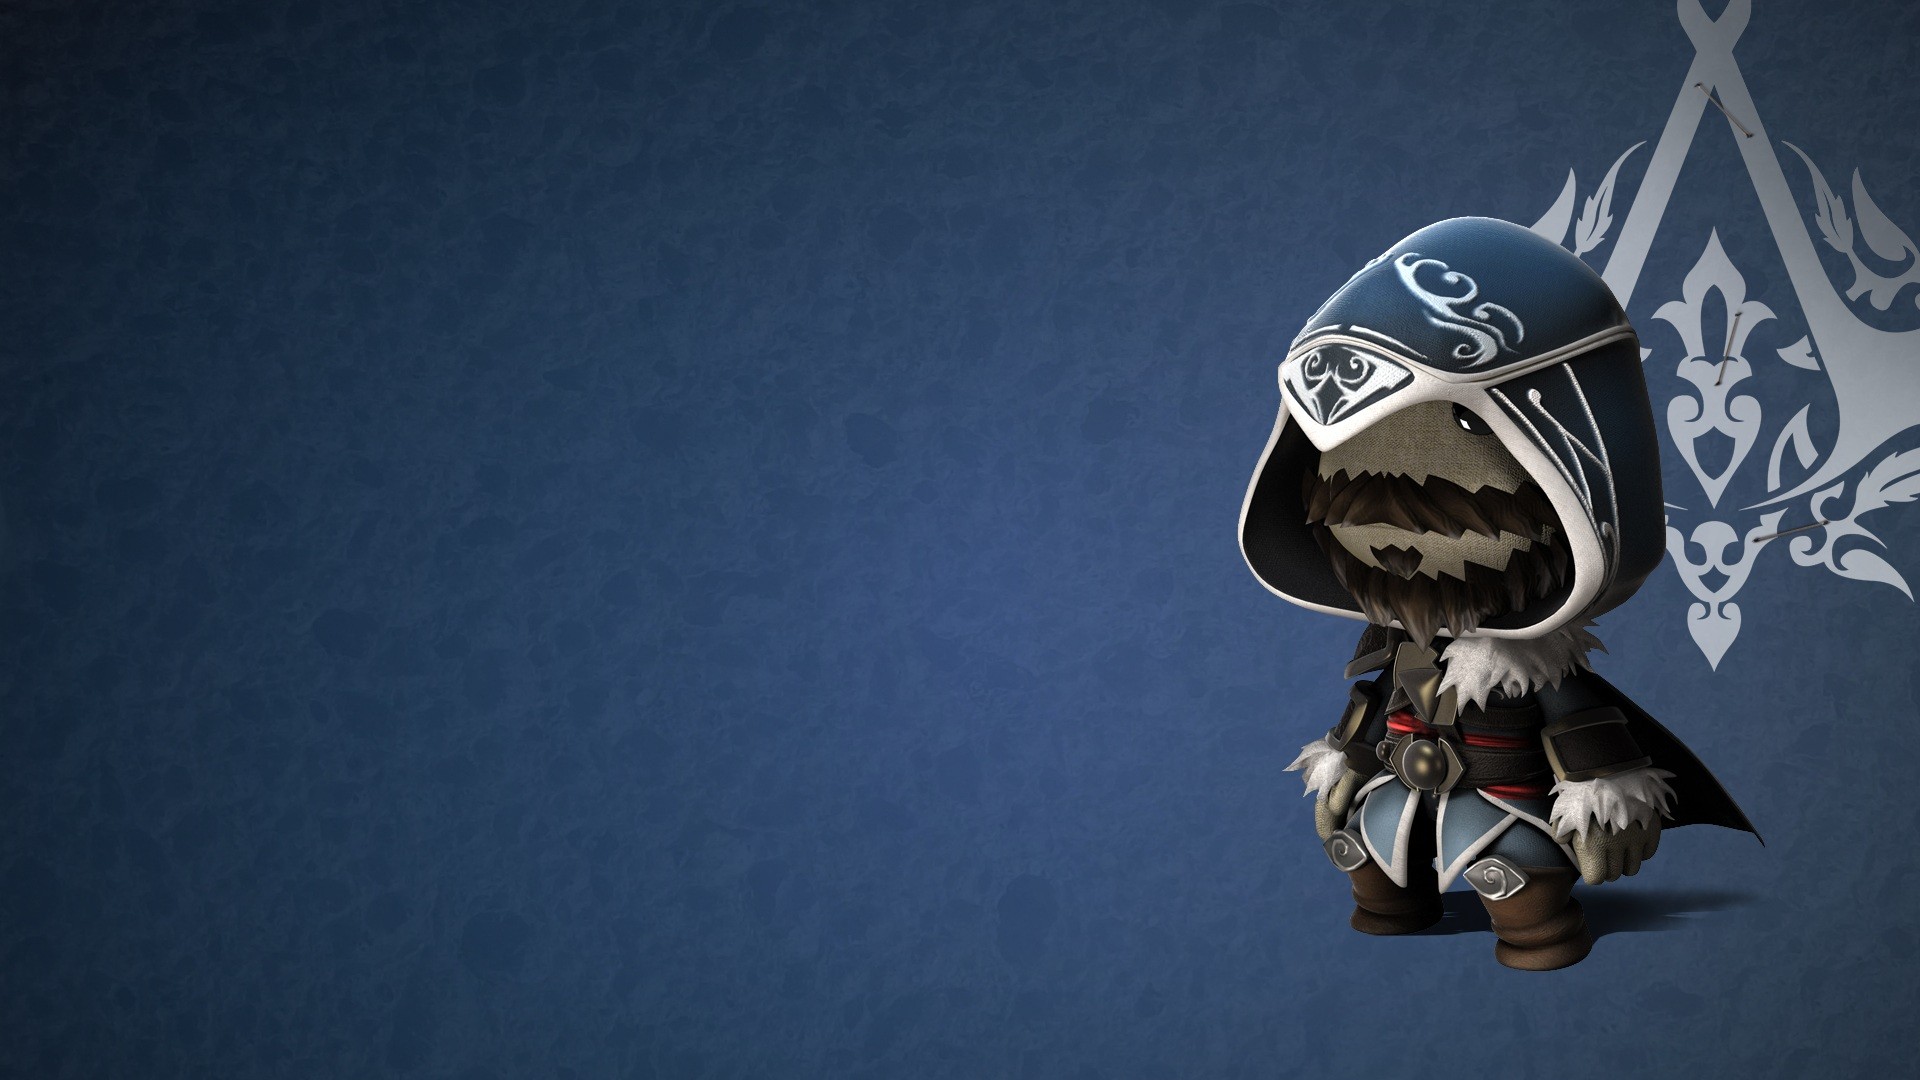 Creed Sackboy Lbp Ps3 HD Wallpaper Background